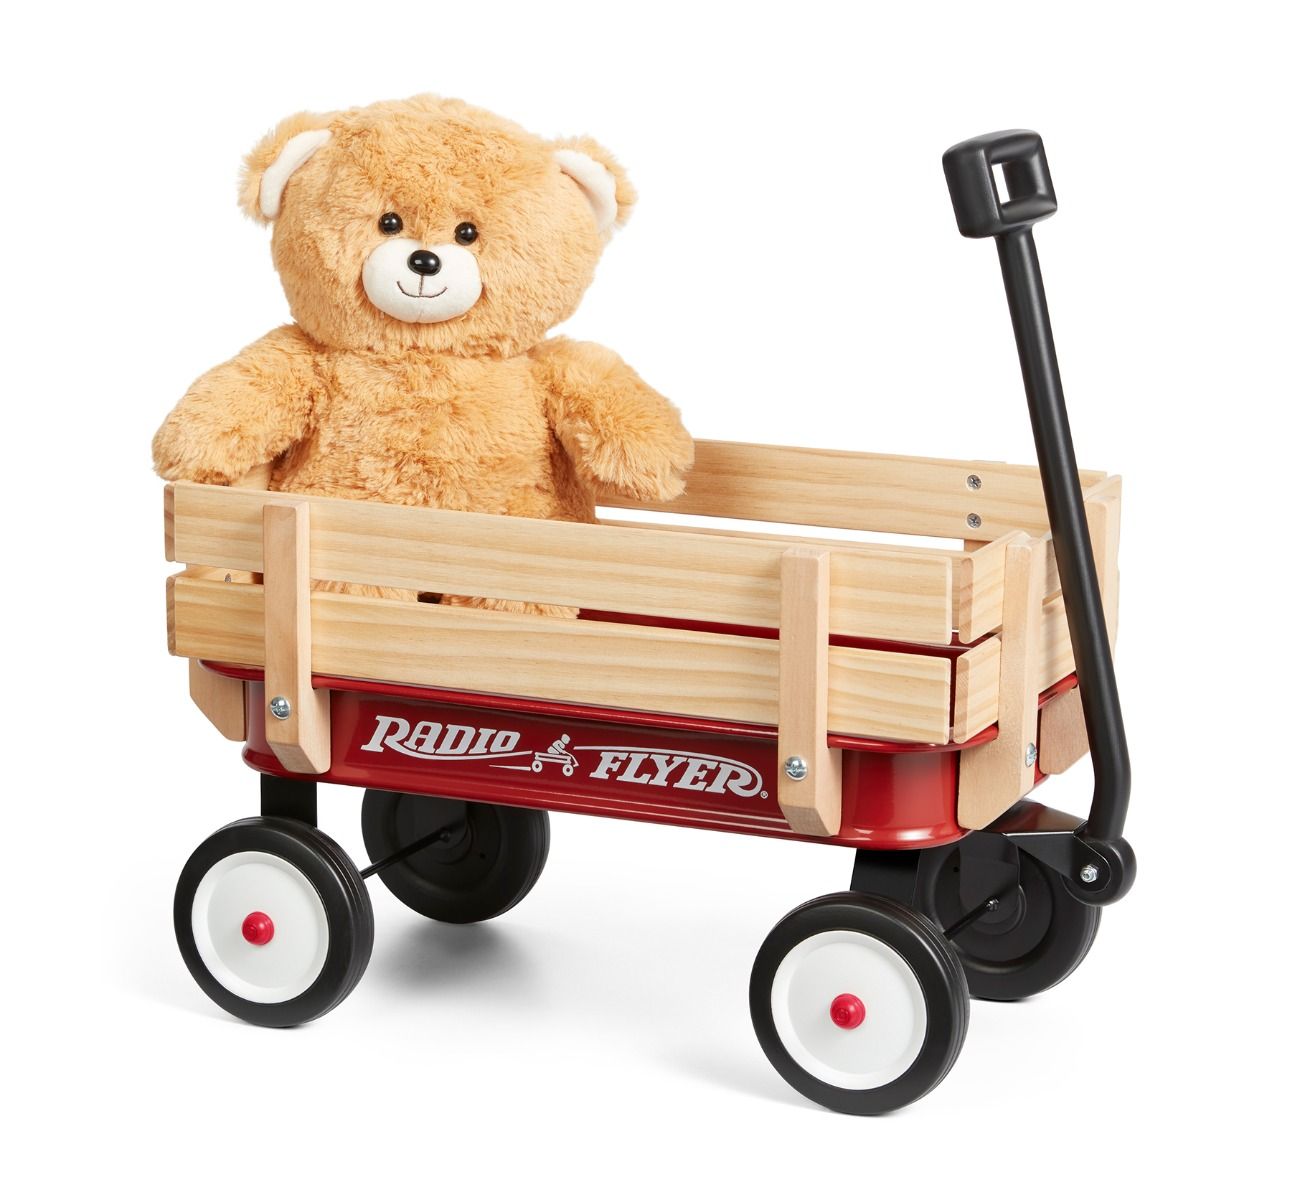 Radio Flyer: My 1st Steel & Wood Wagon w/ Teddy Bear $30, Little Red Roadster $35, 12V Turbo Go-Kart $110 & More + Free Shipping on $59+